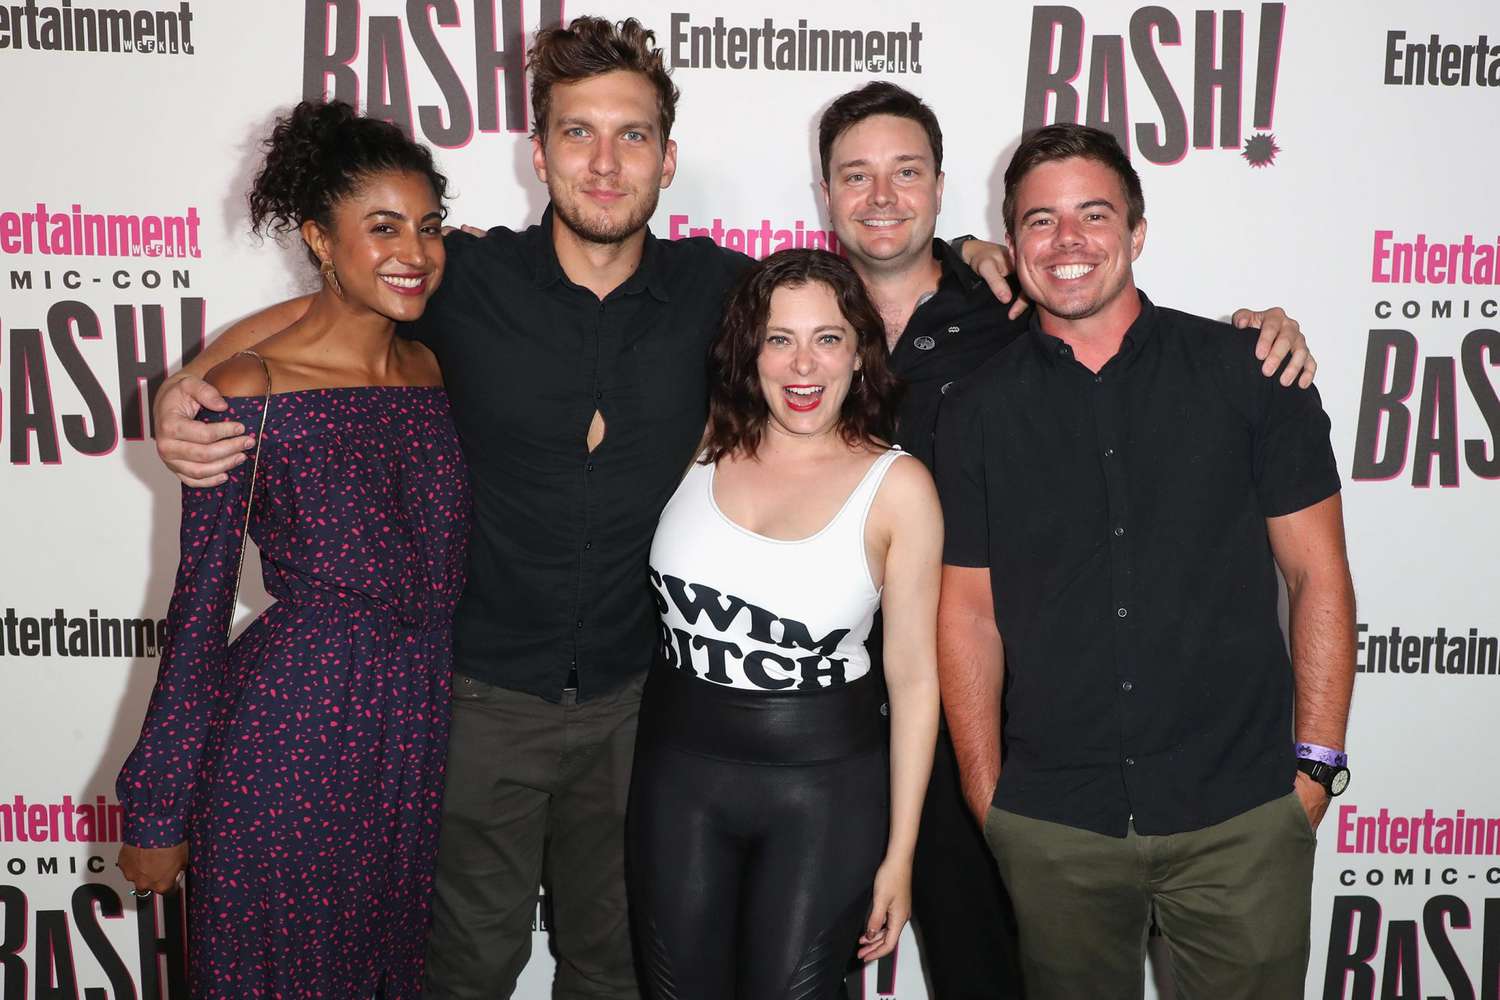 Entertainment Weekly Hosts Its Annual Comic-Con Party At FLOAT At The Hard Rock Hotel In San Diego In Celebration Of Comic-Con 2018 - Arrivals